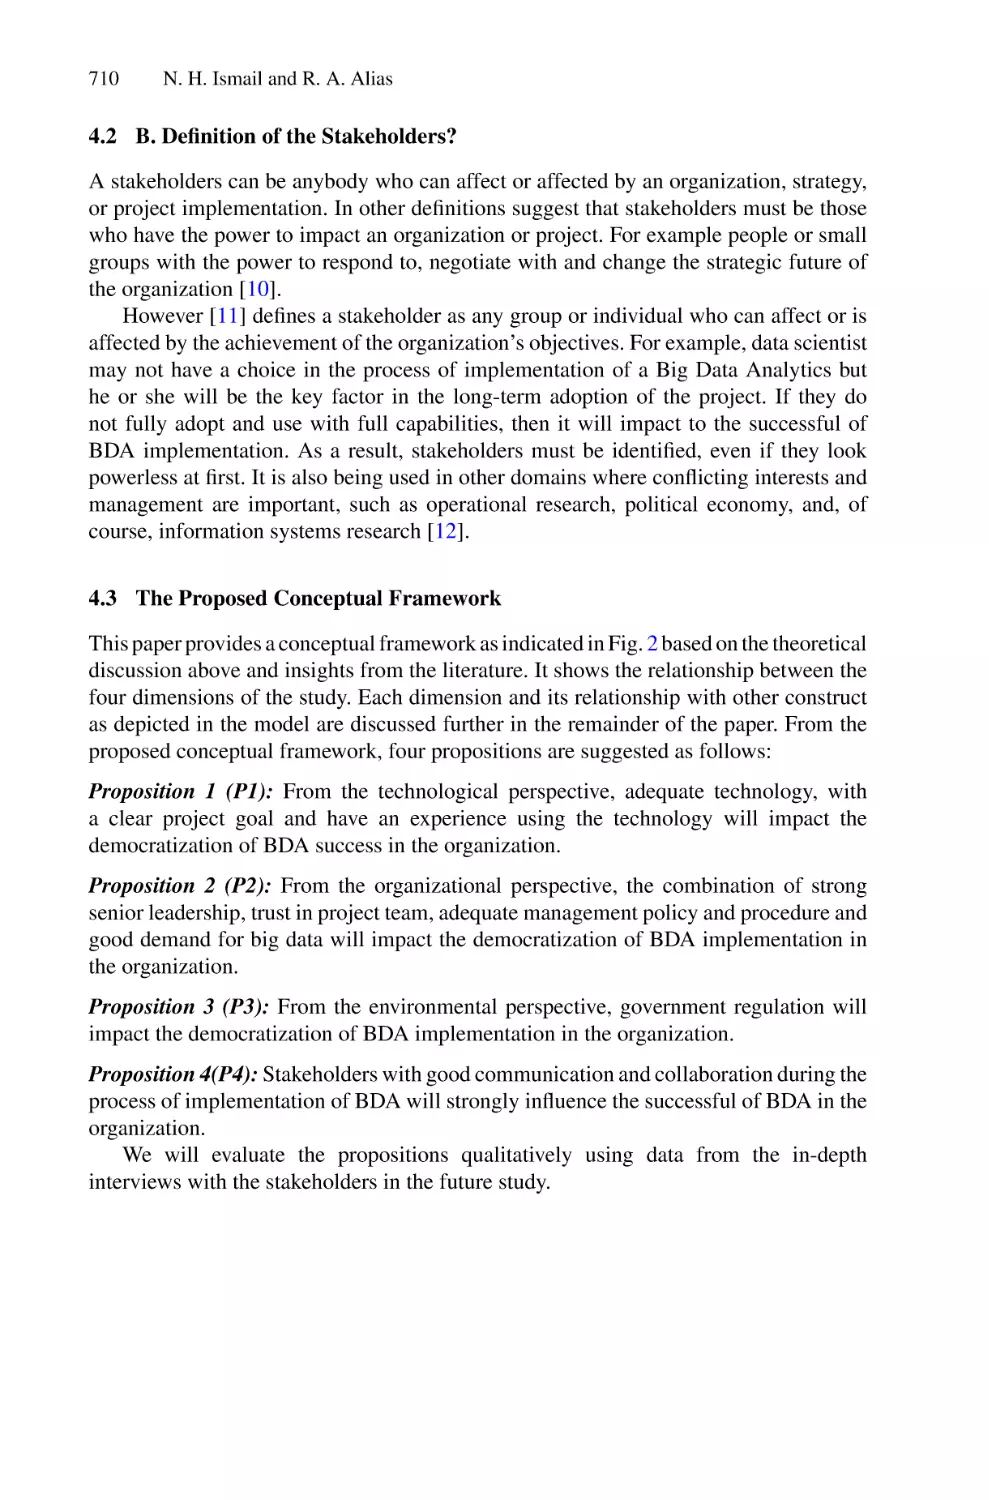 4.2 B. Definition of the Stakeholders?
4.3 The Proposed Conceptual Framework